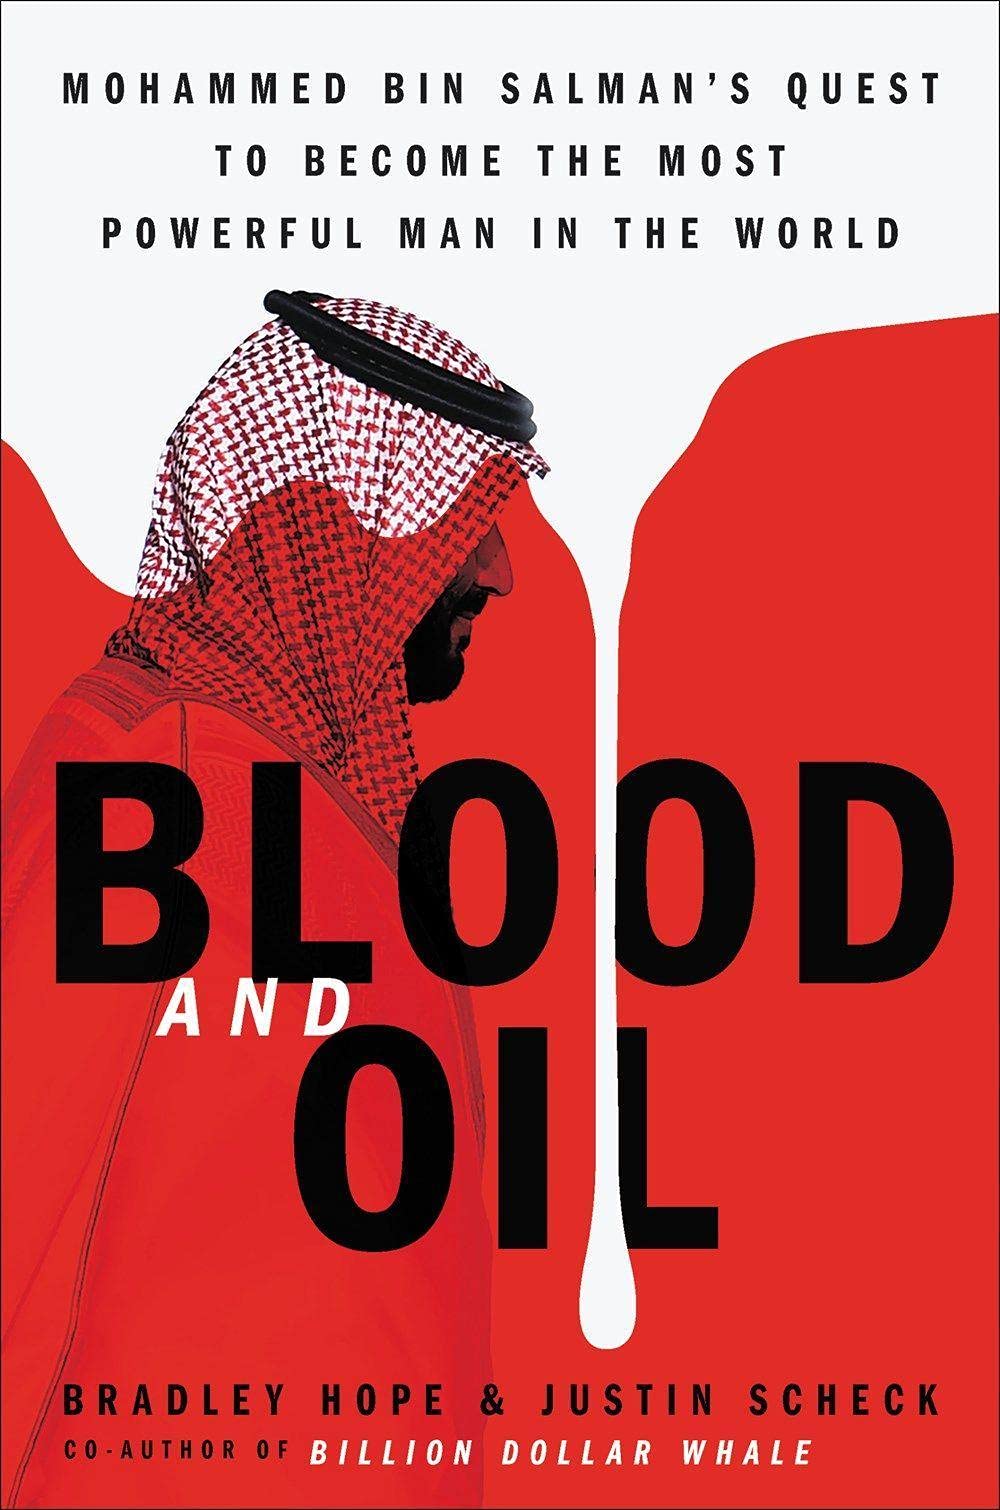 Blood and Oil: Mohammed Bin Salman퓋 Ruthless Quest for Global Power (Paperback)